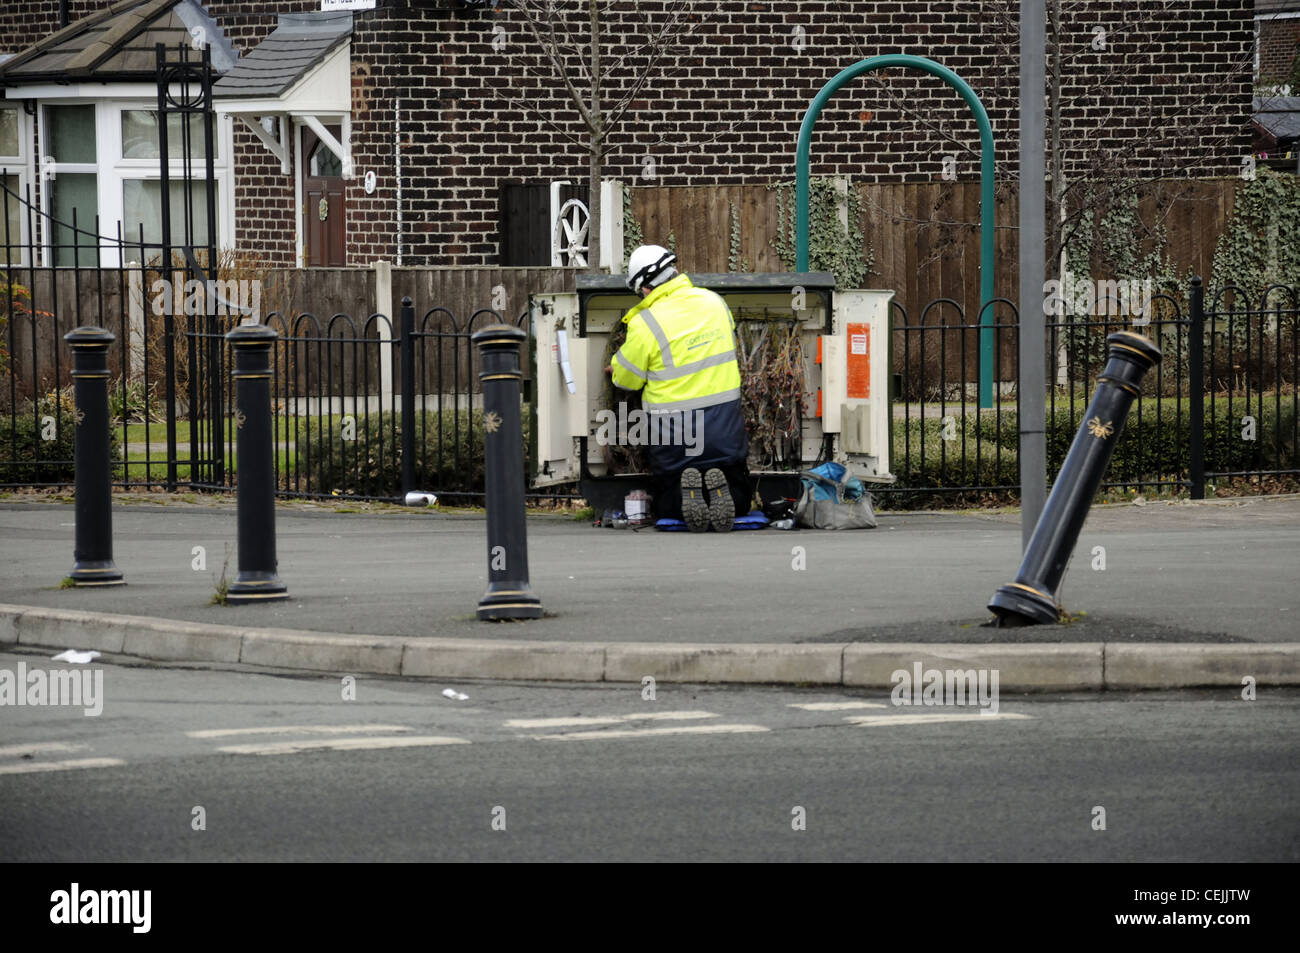 Openreach engineer working on pavement sited telephone junction box Stock Photo